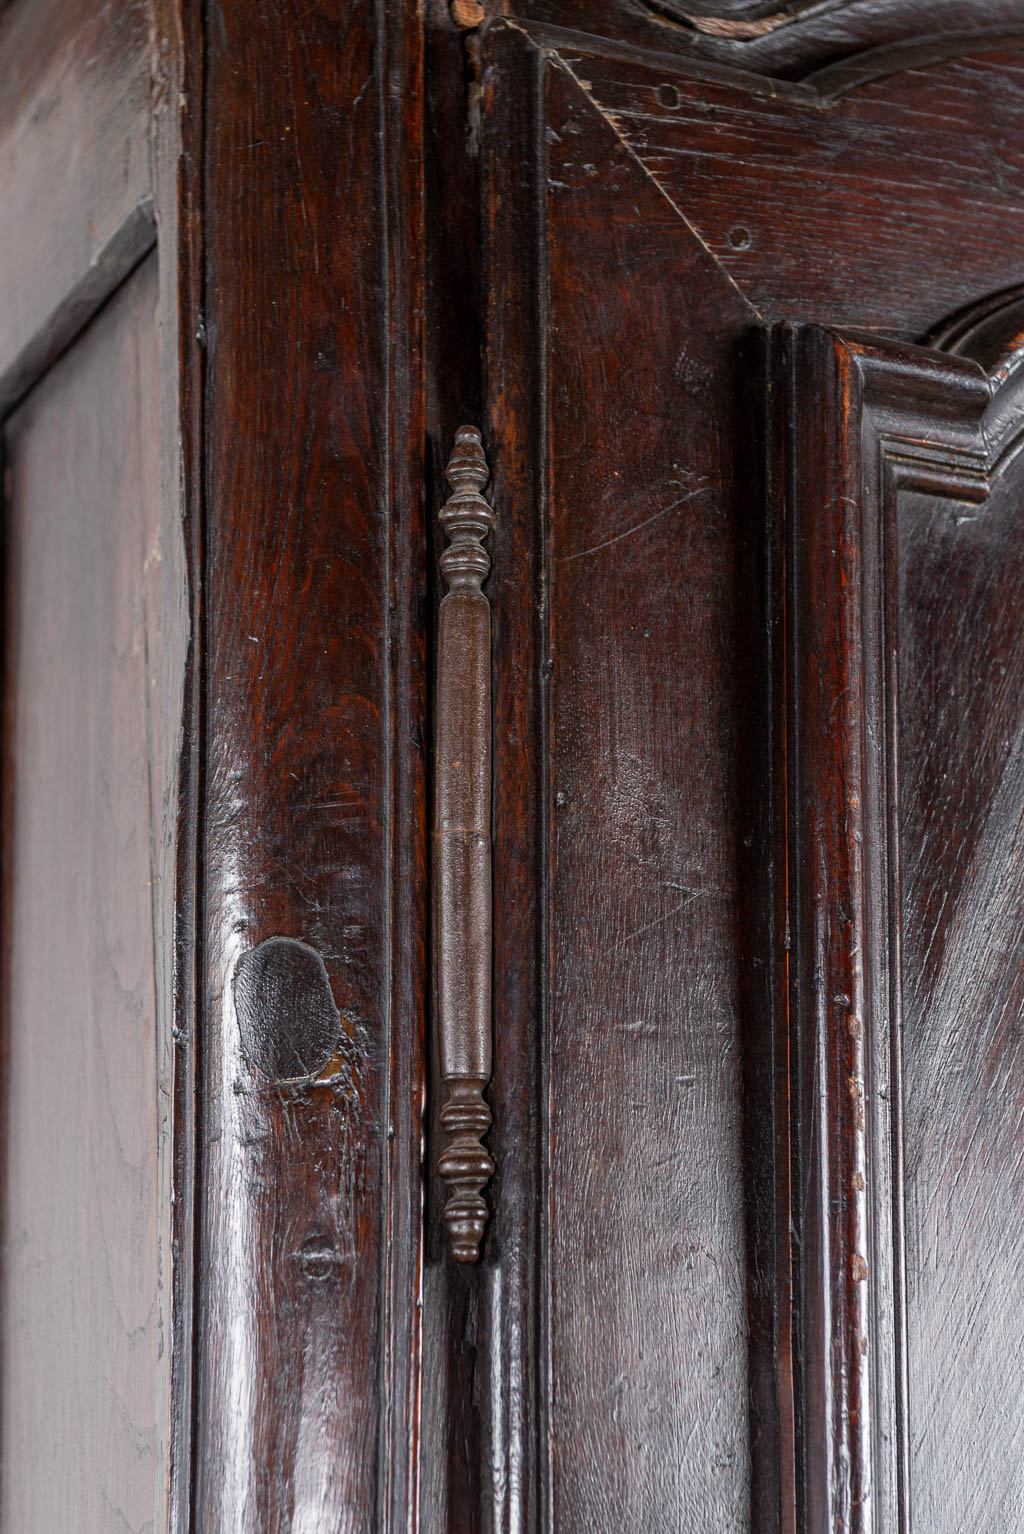 An antique wardrobe made of oak, early 18th century. (H:254cm)